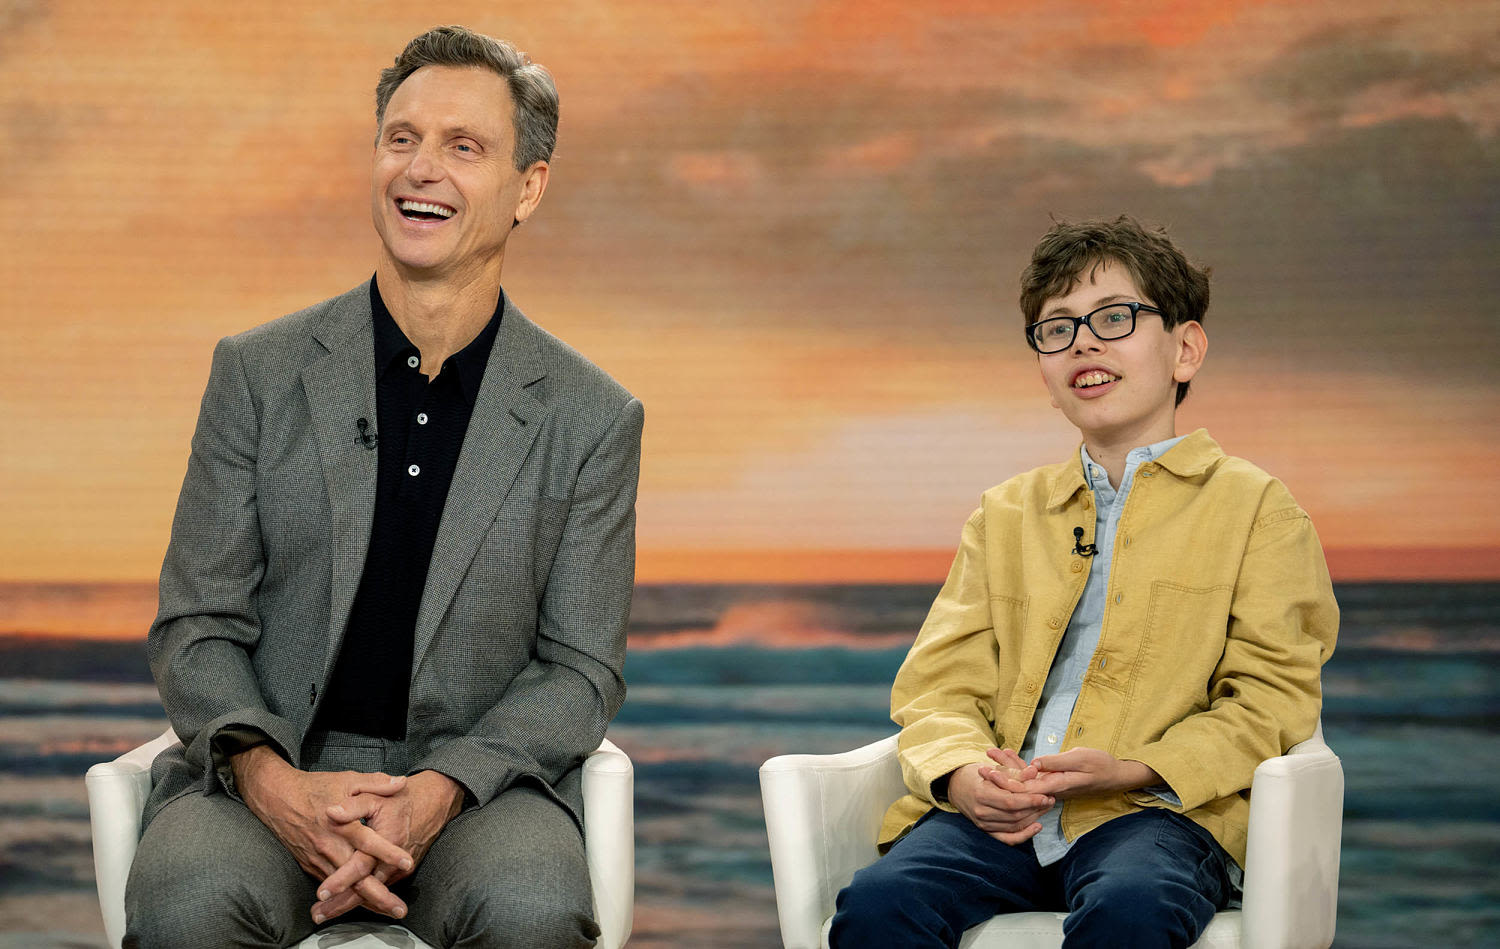 Tony Goldwyn says he’ll help get his 15-year-old 'Ezra' co-star a guest spot on ‘Law & Order’